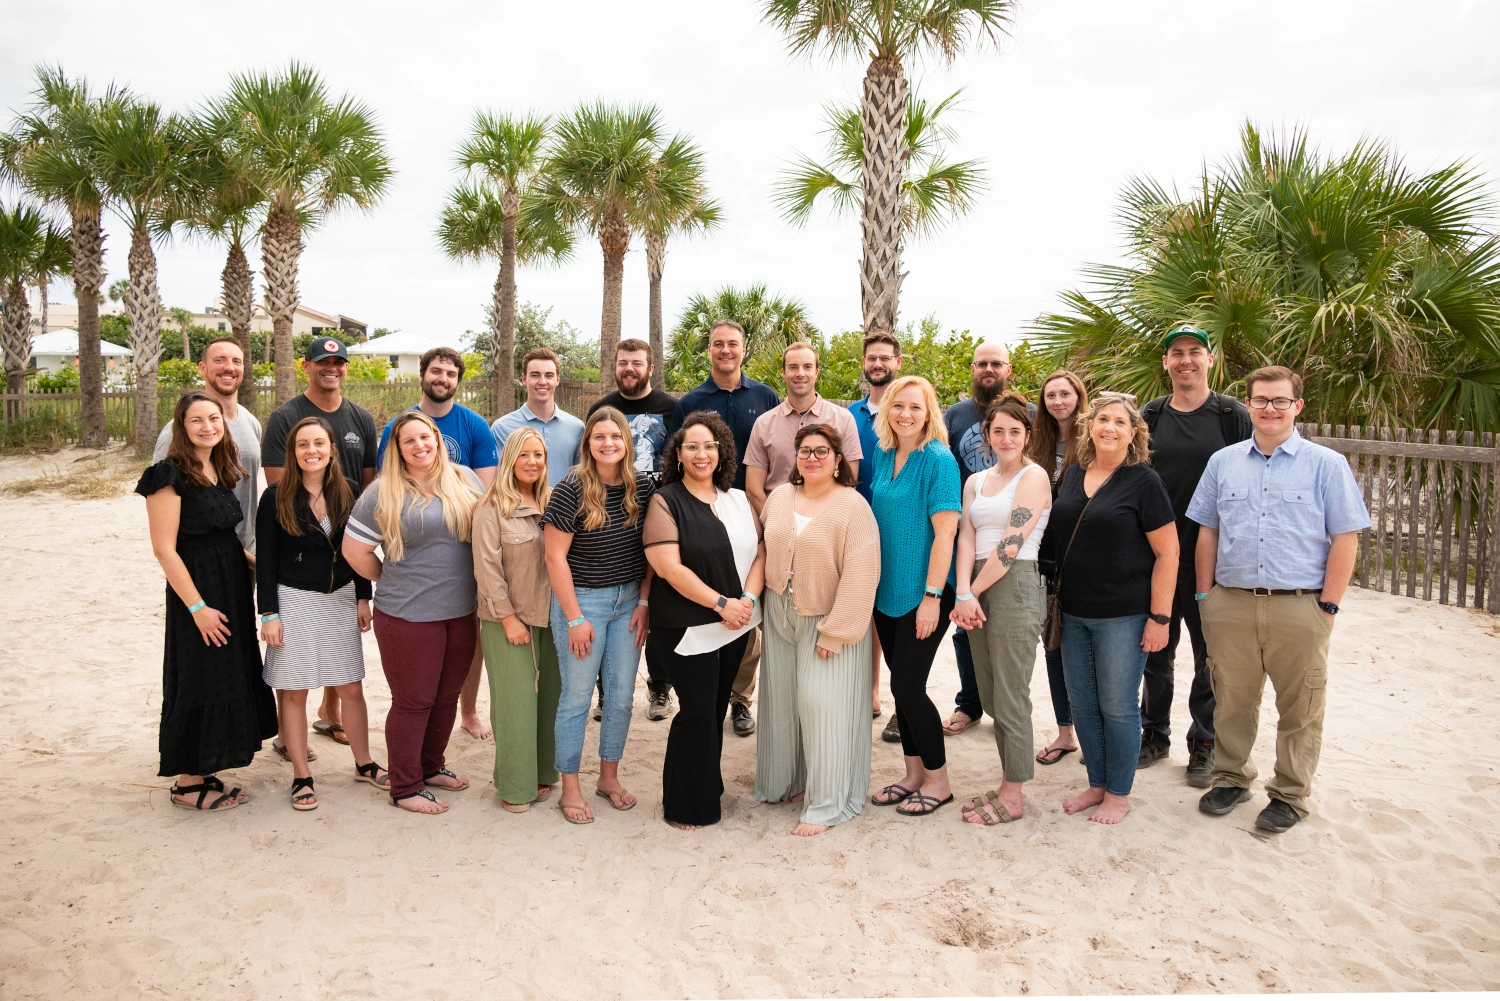 A group photo of Global Travel Alliance employees.